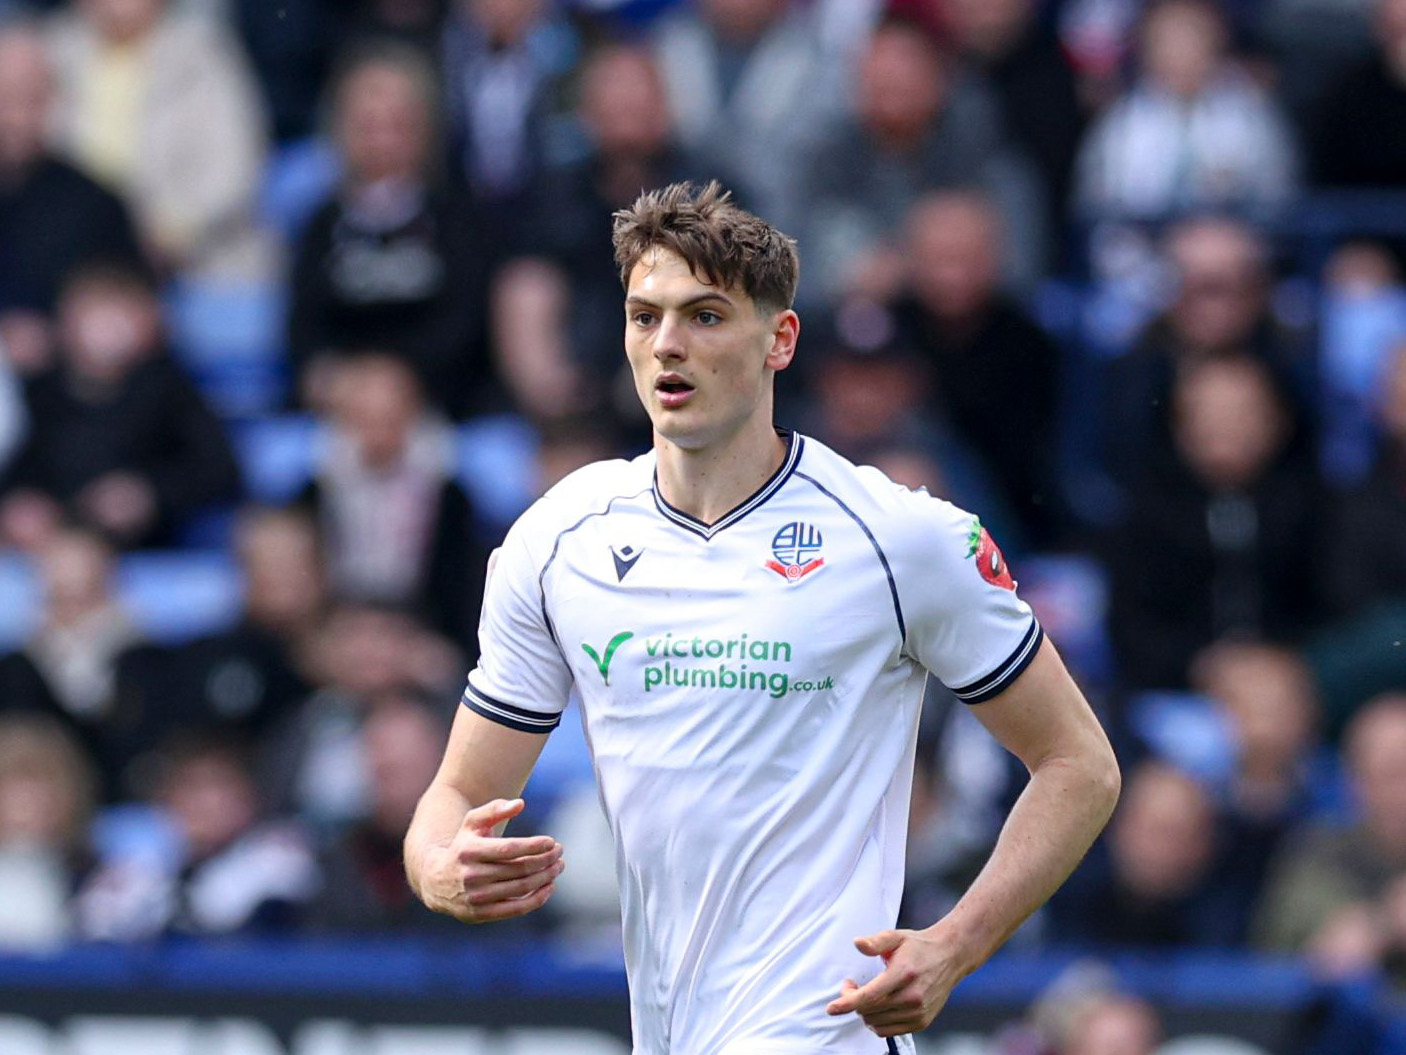 Caleb Taylor playing for Bolton while wearing their home kit